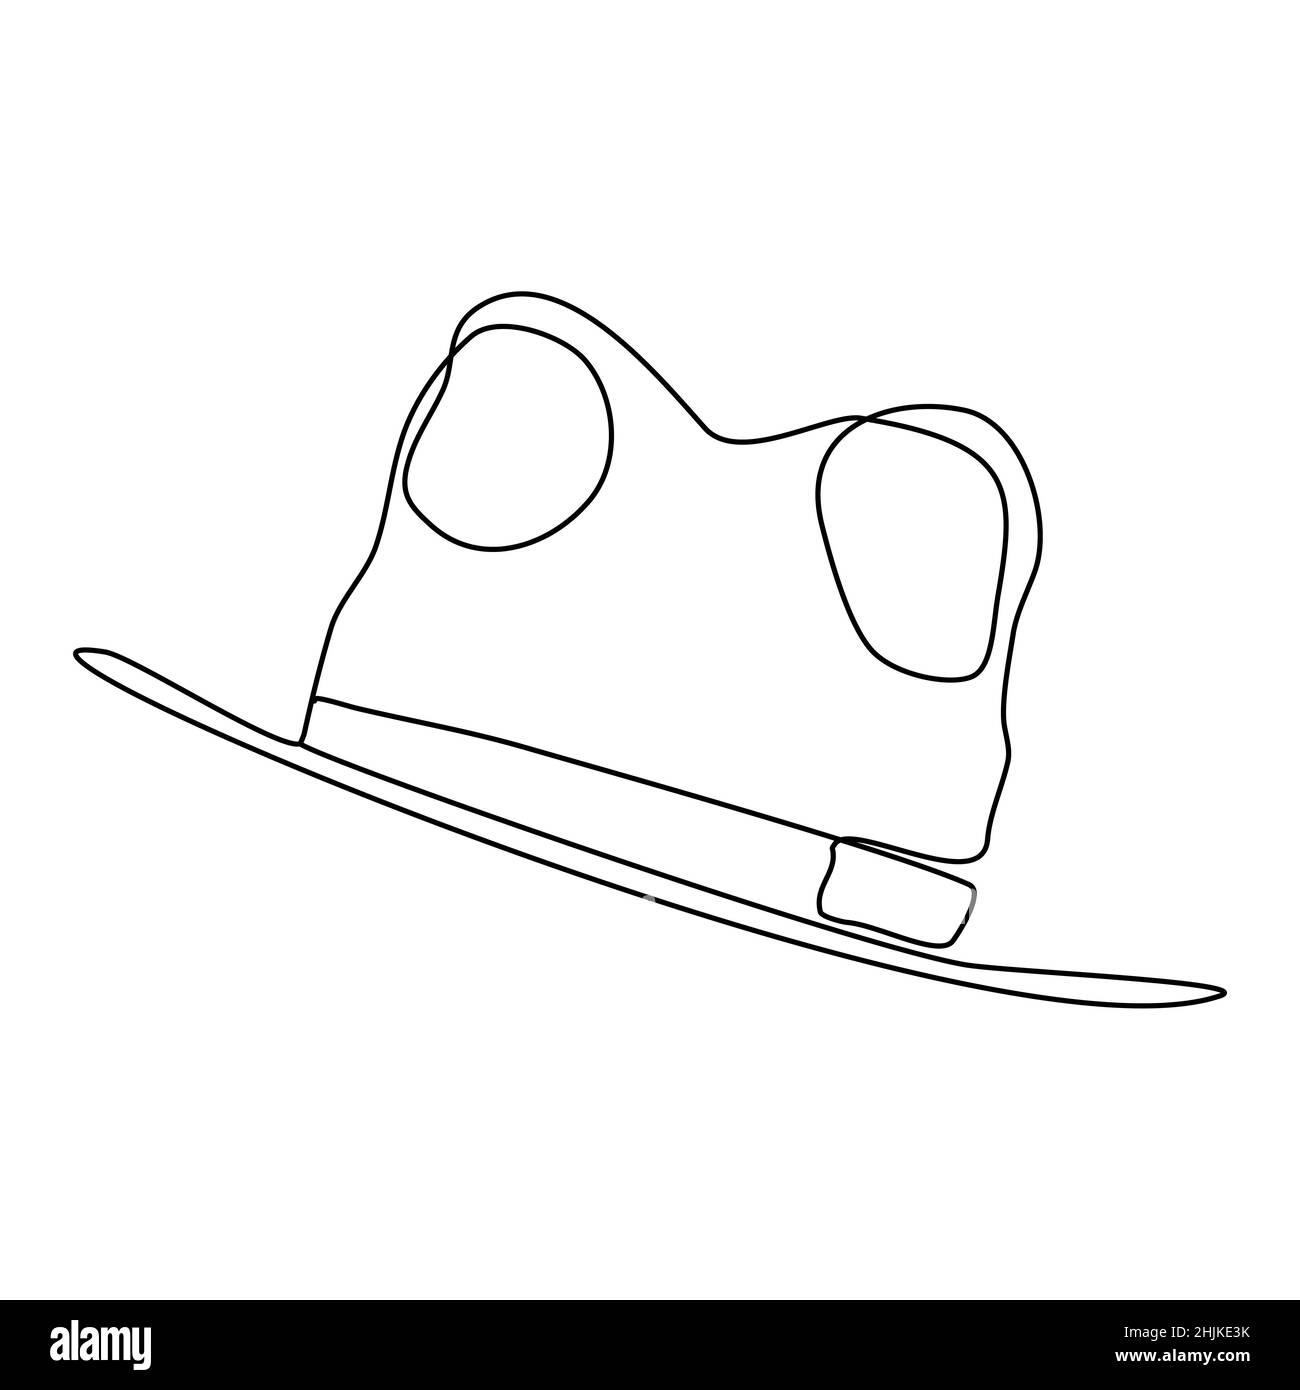 Cowboy hat silhouette. Continuous line drawing of gunslinger apparel. Cow boy hat drawn in simple minimalist outline Stock Vector